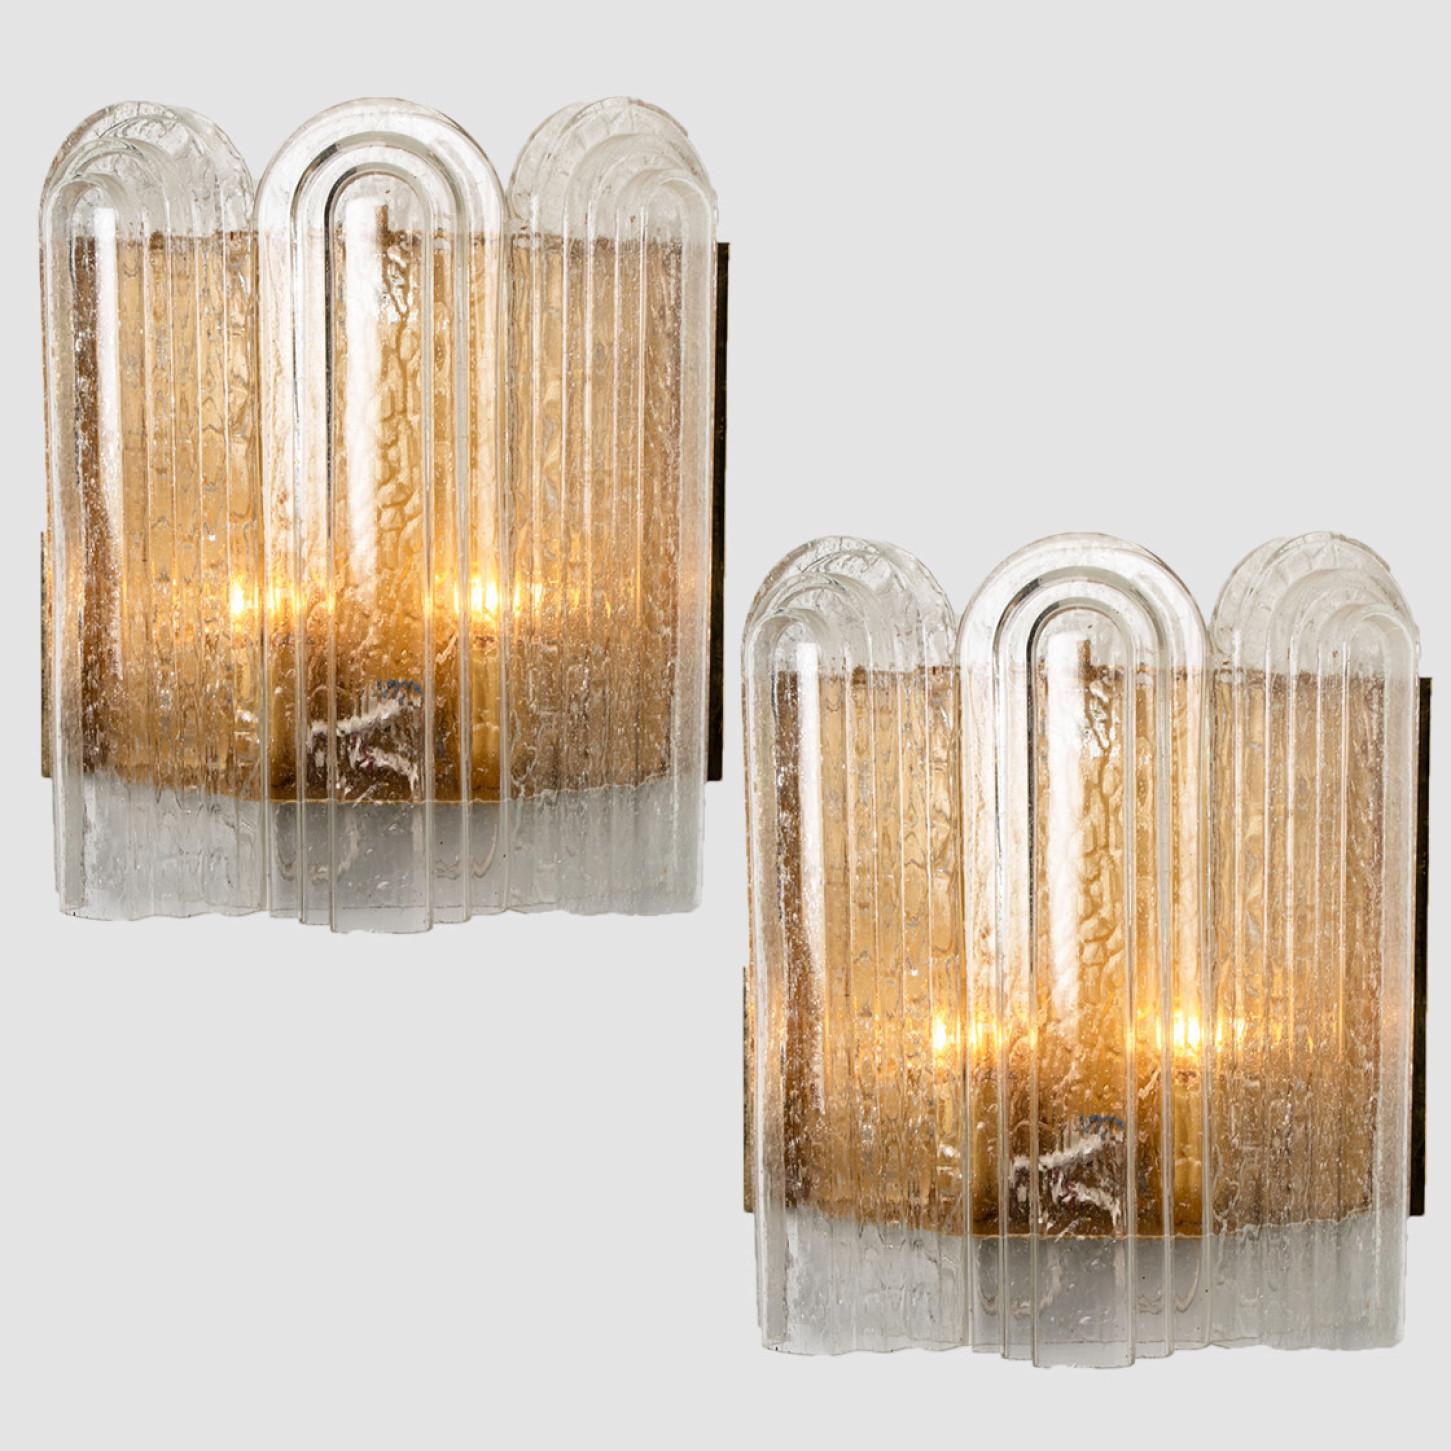 These blown glass wall sconces are designed and manufactured by the iconic firm of Doria Leuchten, Germany in 1960.
They are designed with a brass back plate and art deco style glass shades. High-end pieces.
Dimensions
H 17.72 in (45cm) x W 11.81